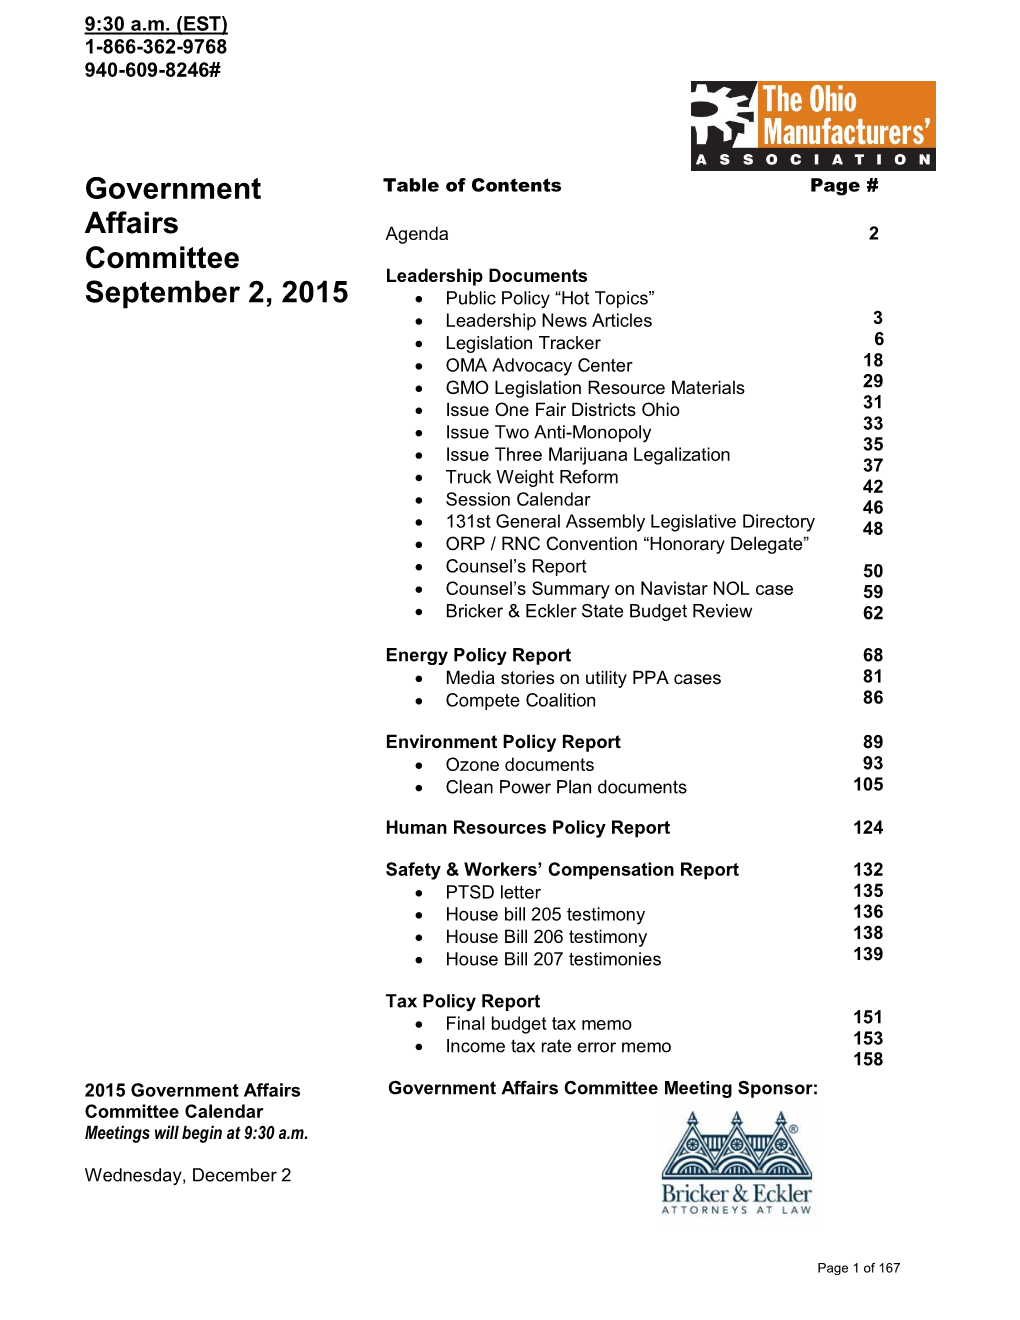 Government Affairs Committee September 2, 2015